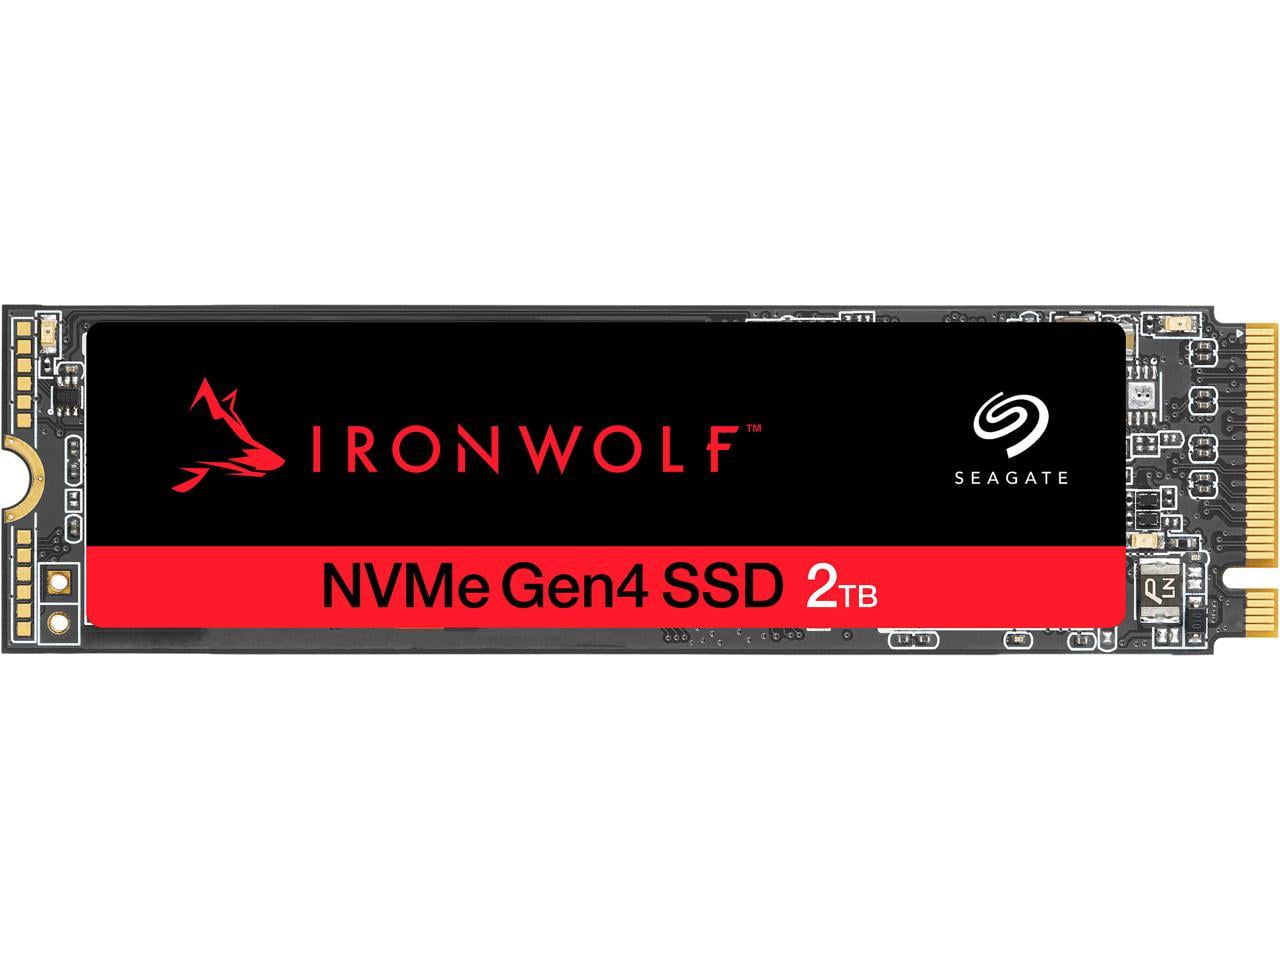 UPC 763649170762 product image for ZP2000NM3A002 2 TB IronWolf 525 PCIe 4.0 M.2 NVMe SSD | upcitemdb.com